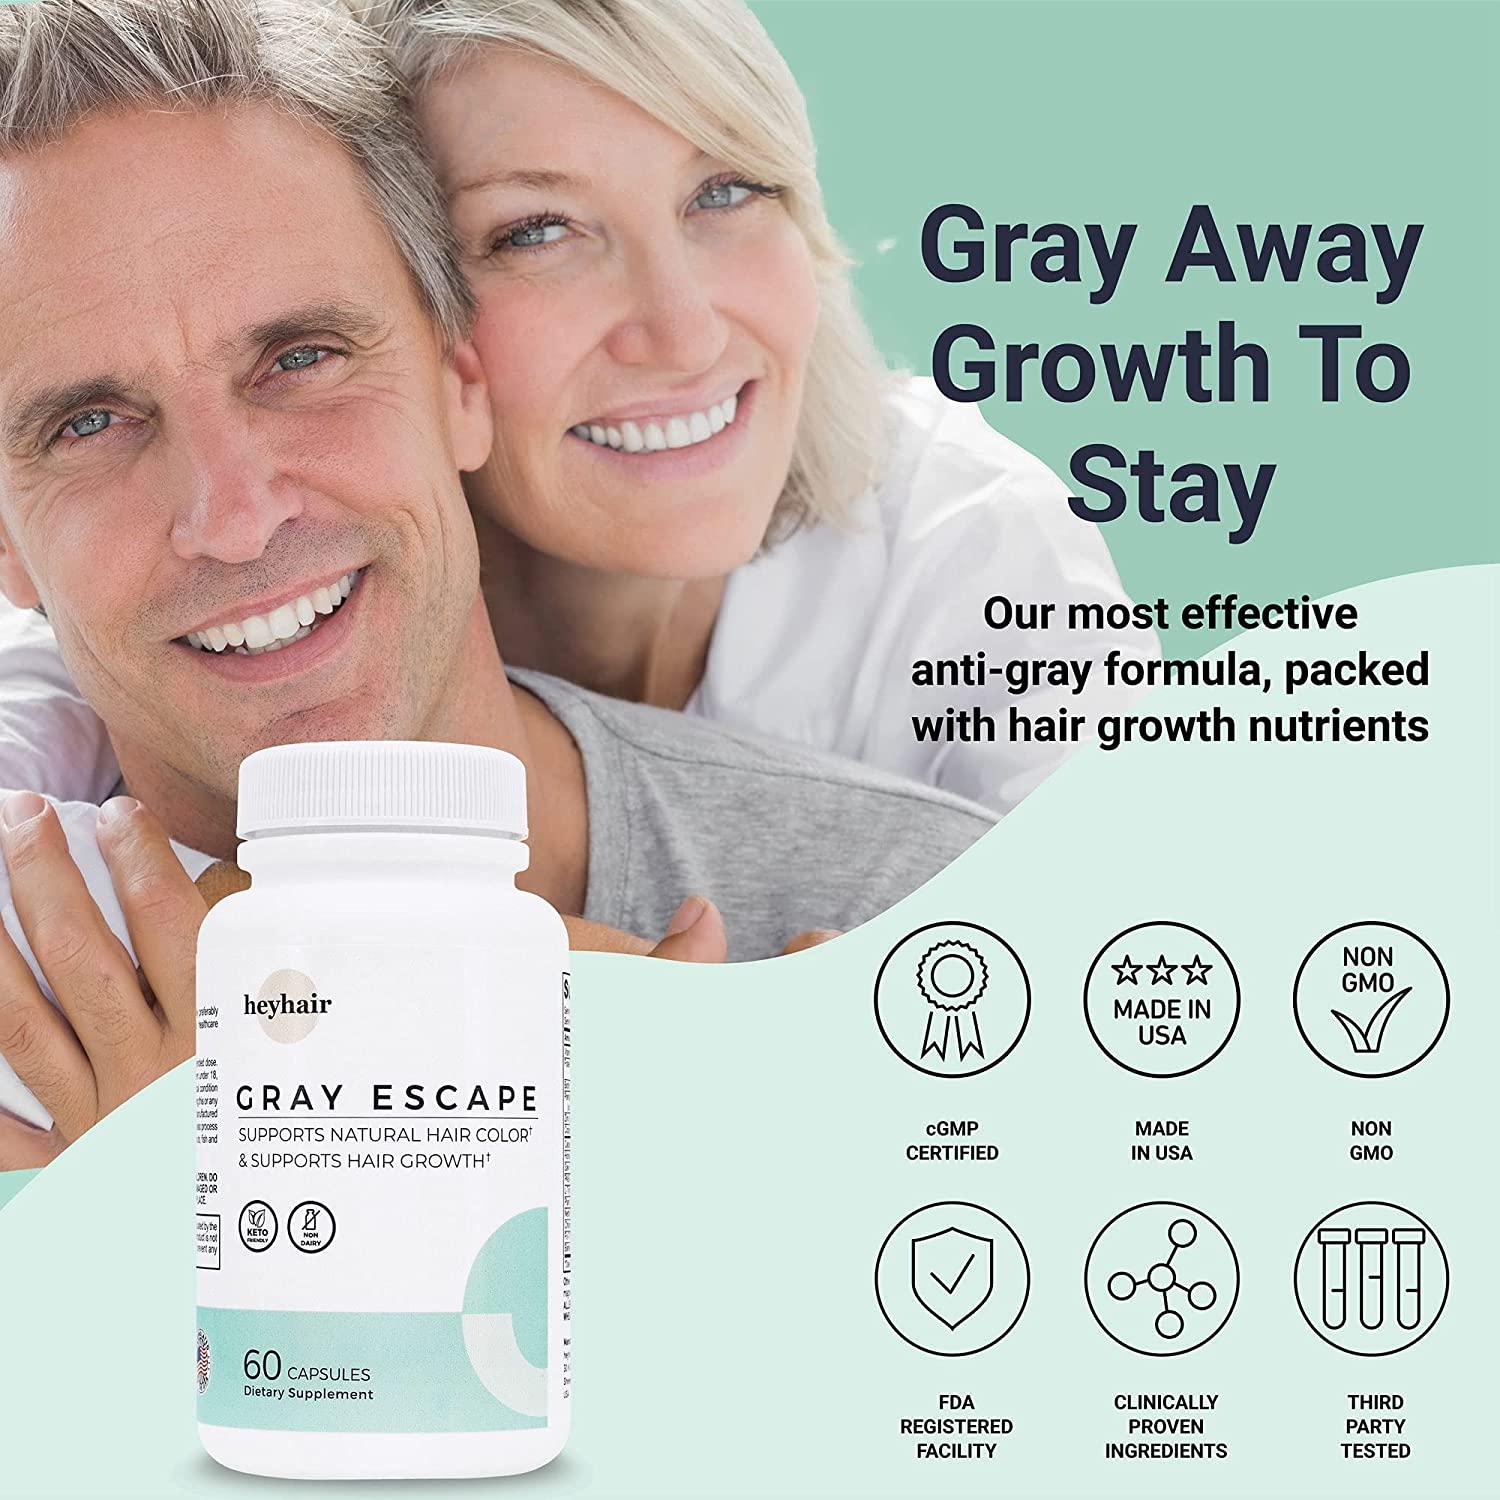 heyhair Gray Escape Advanced Anti Gray Hair Growth Supplement - Catalase,  Saw Palmetto, Biotin, FoTi, PABA (2 Capsules per Day / 1 Month Supply)